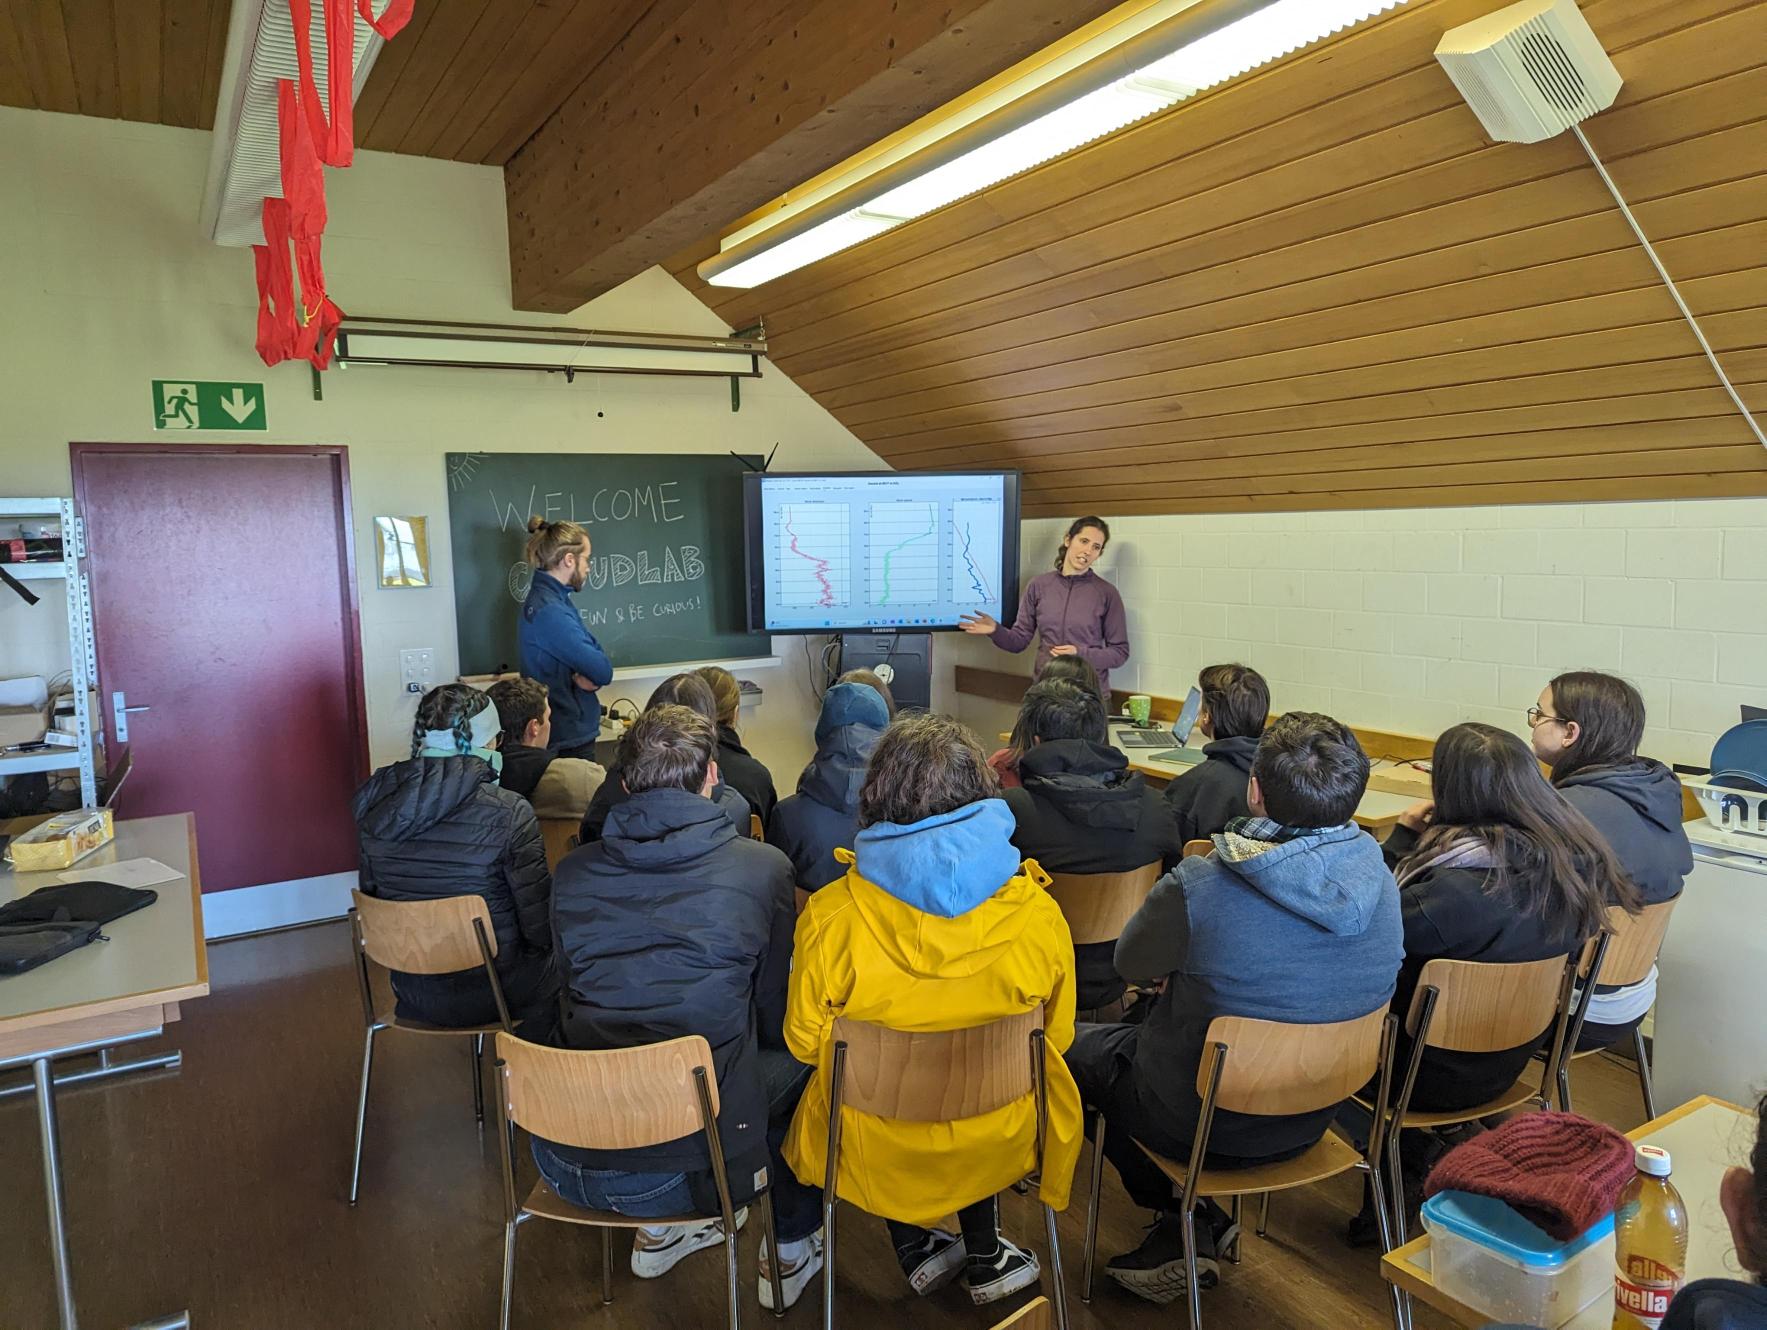 Enlarged view: Dissemination of the collected data from radiosonde, UAV and the ground based remote sensing devices by Christopher Fuchs and Dr. Fabiola Ramelli with active participation from the students